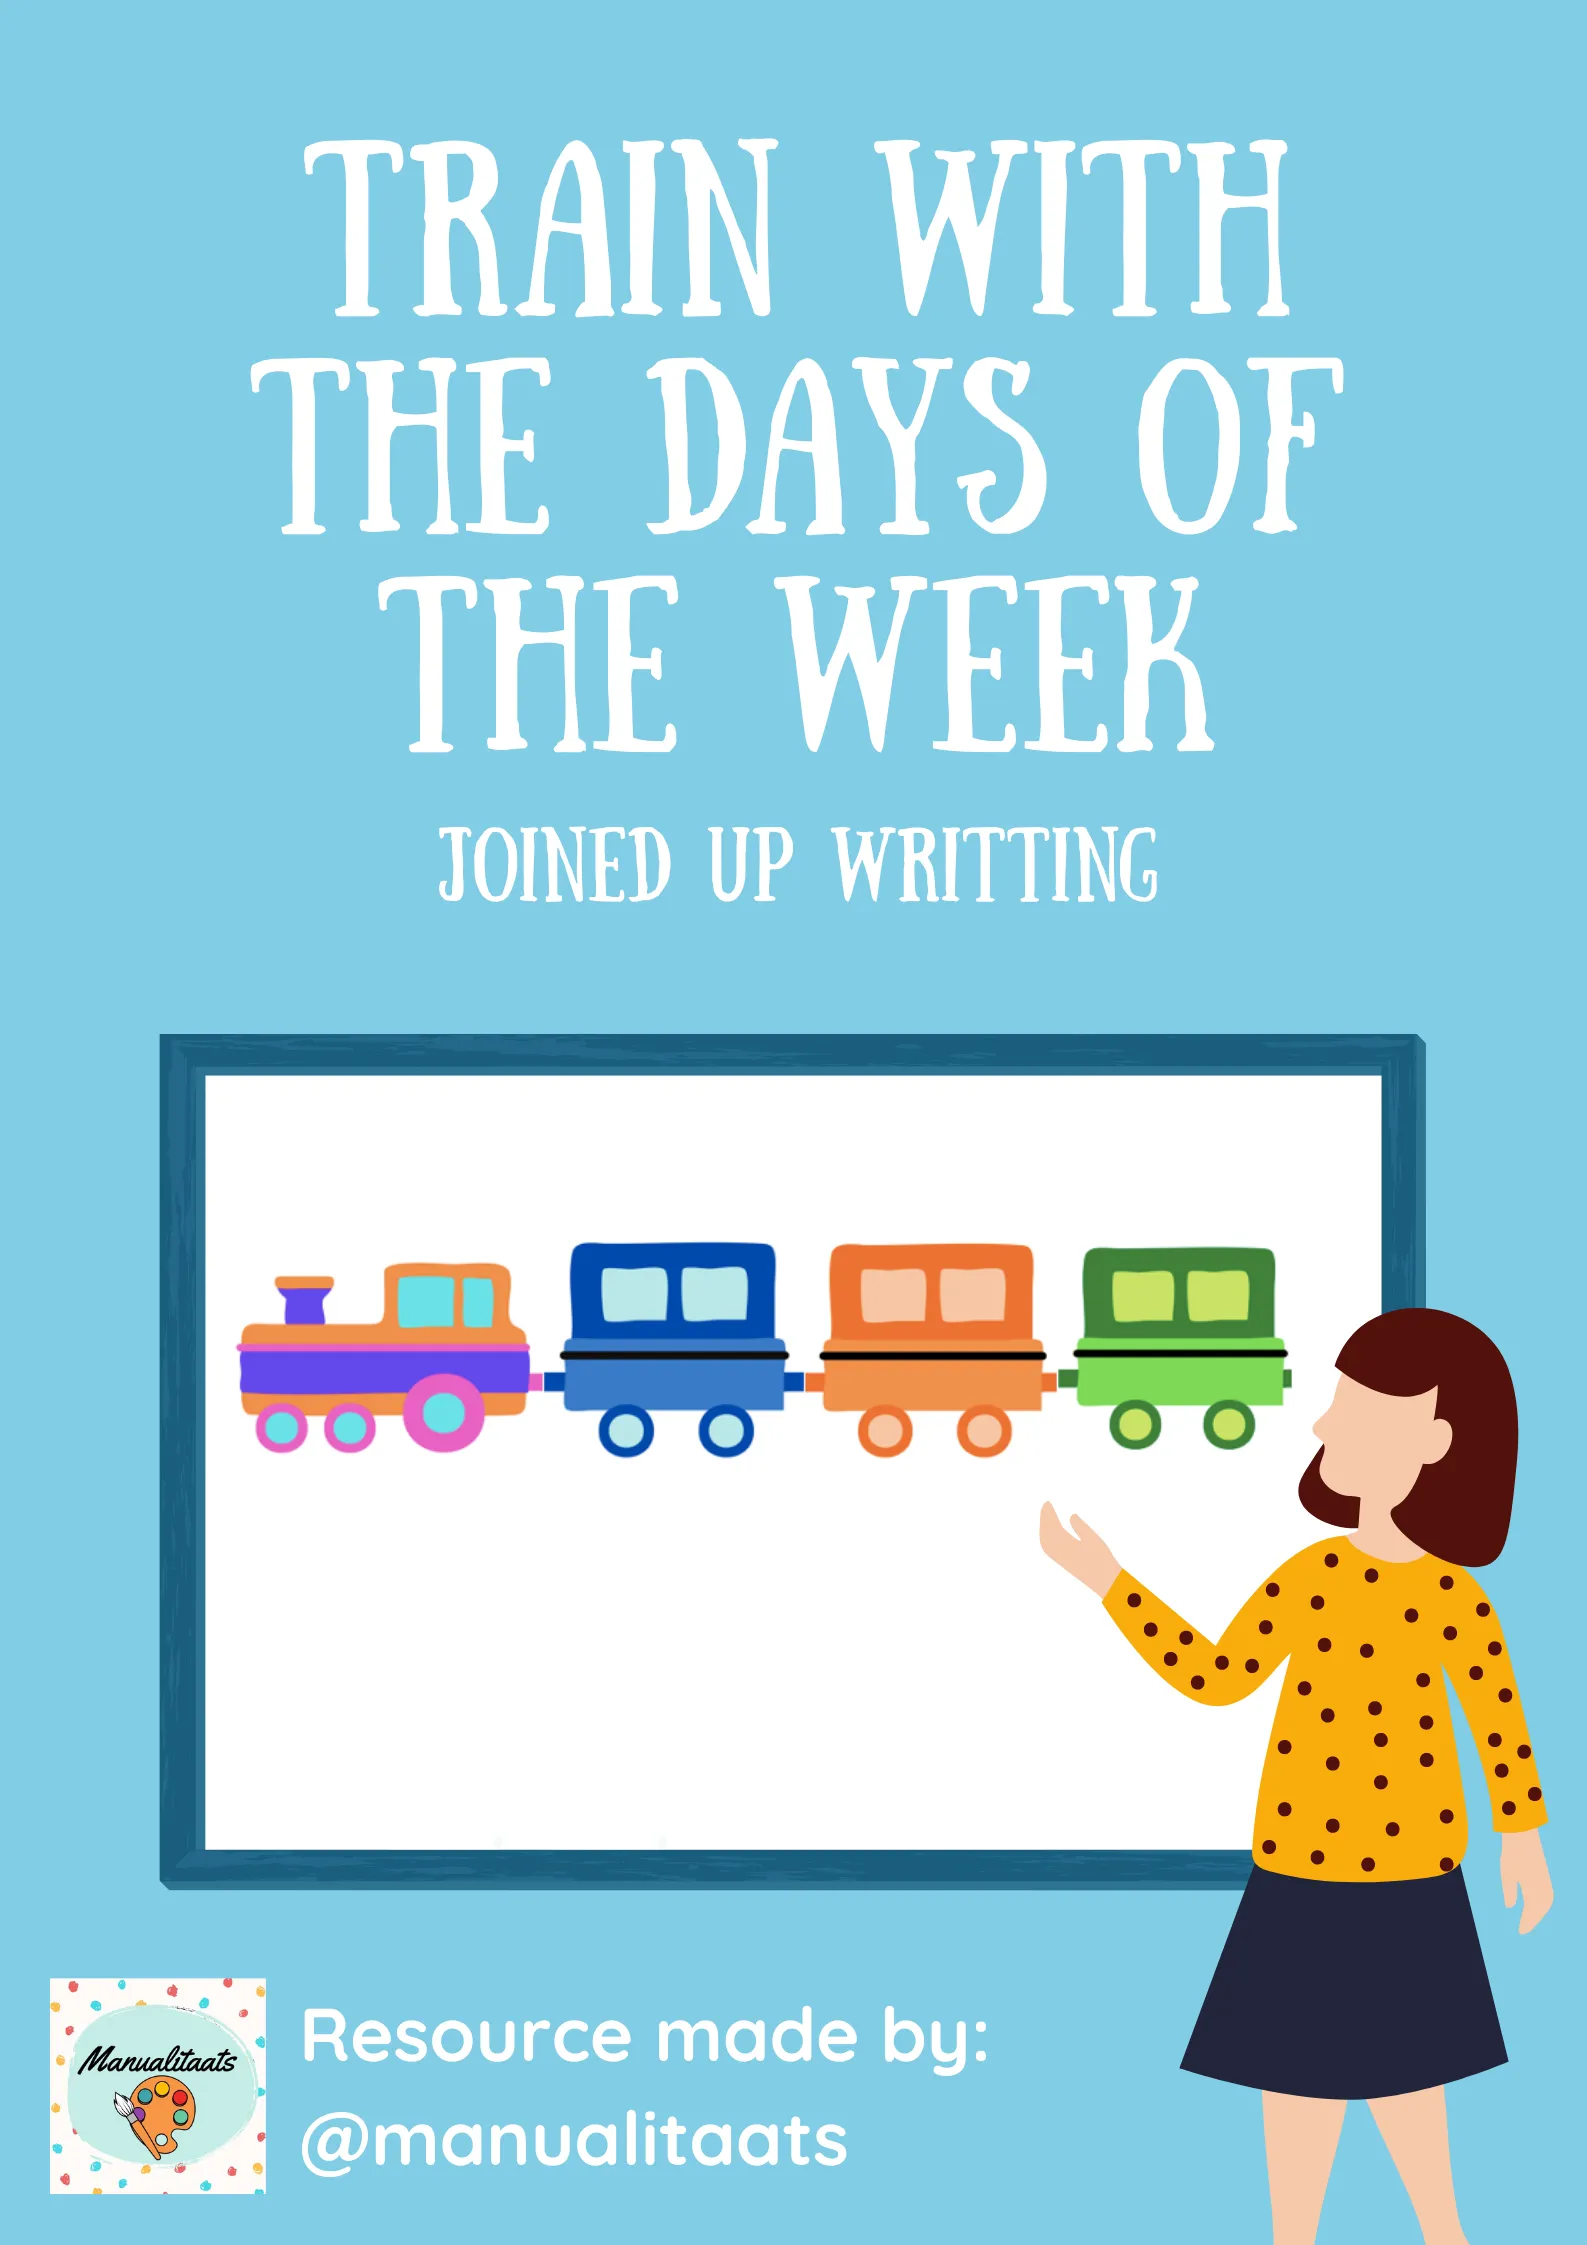 Train with the days of the week (joined up writing)